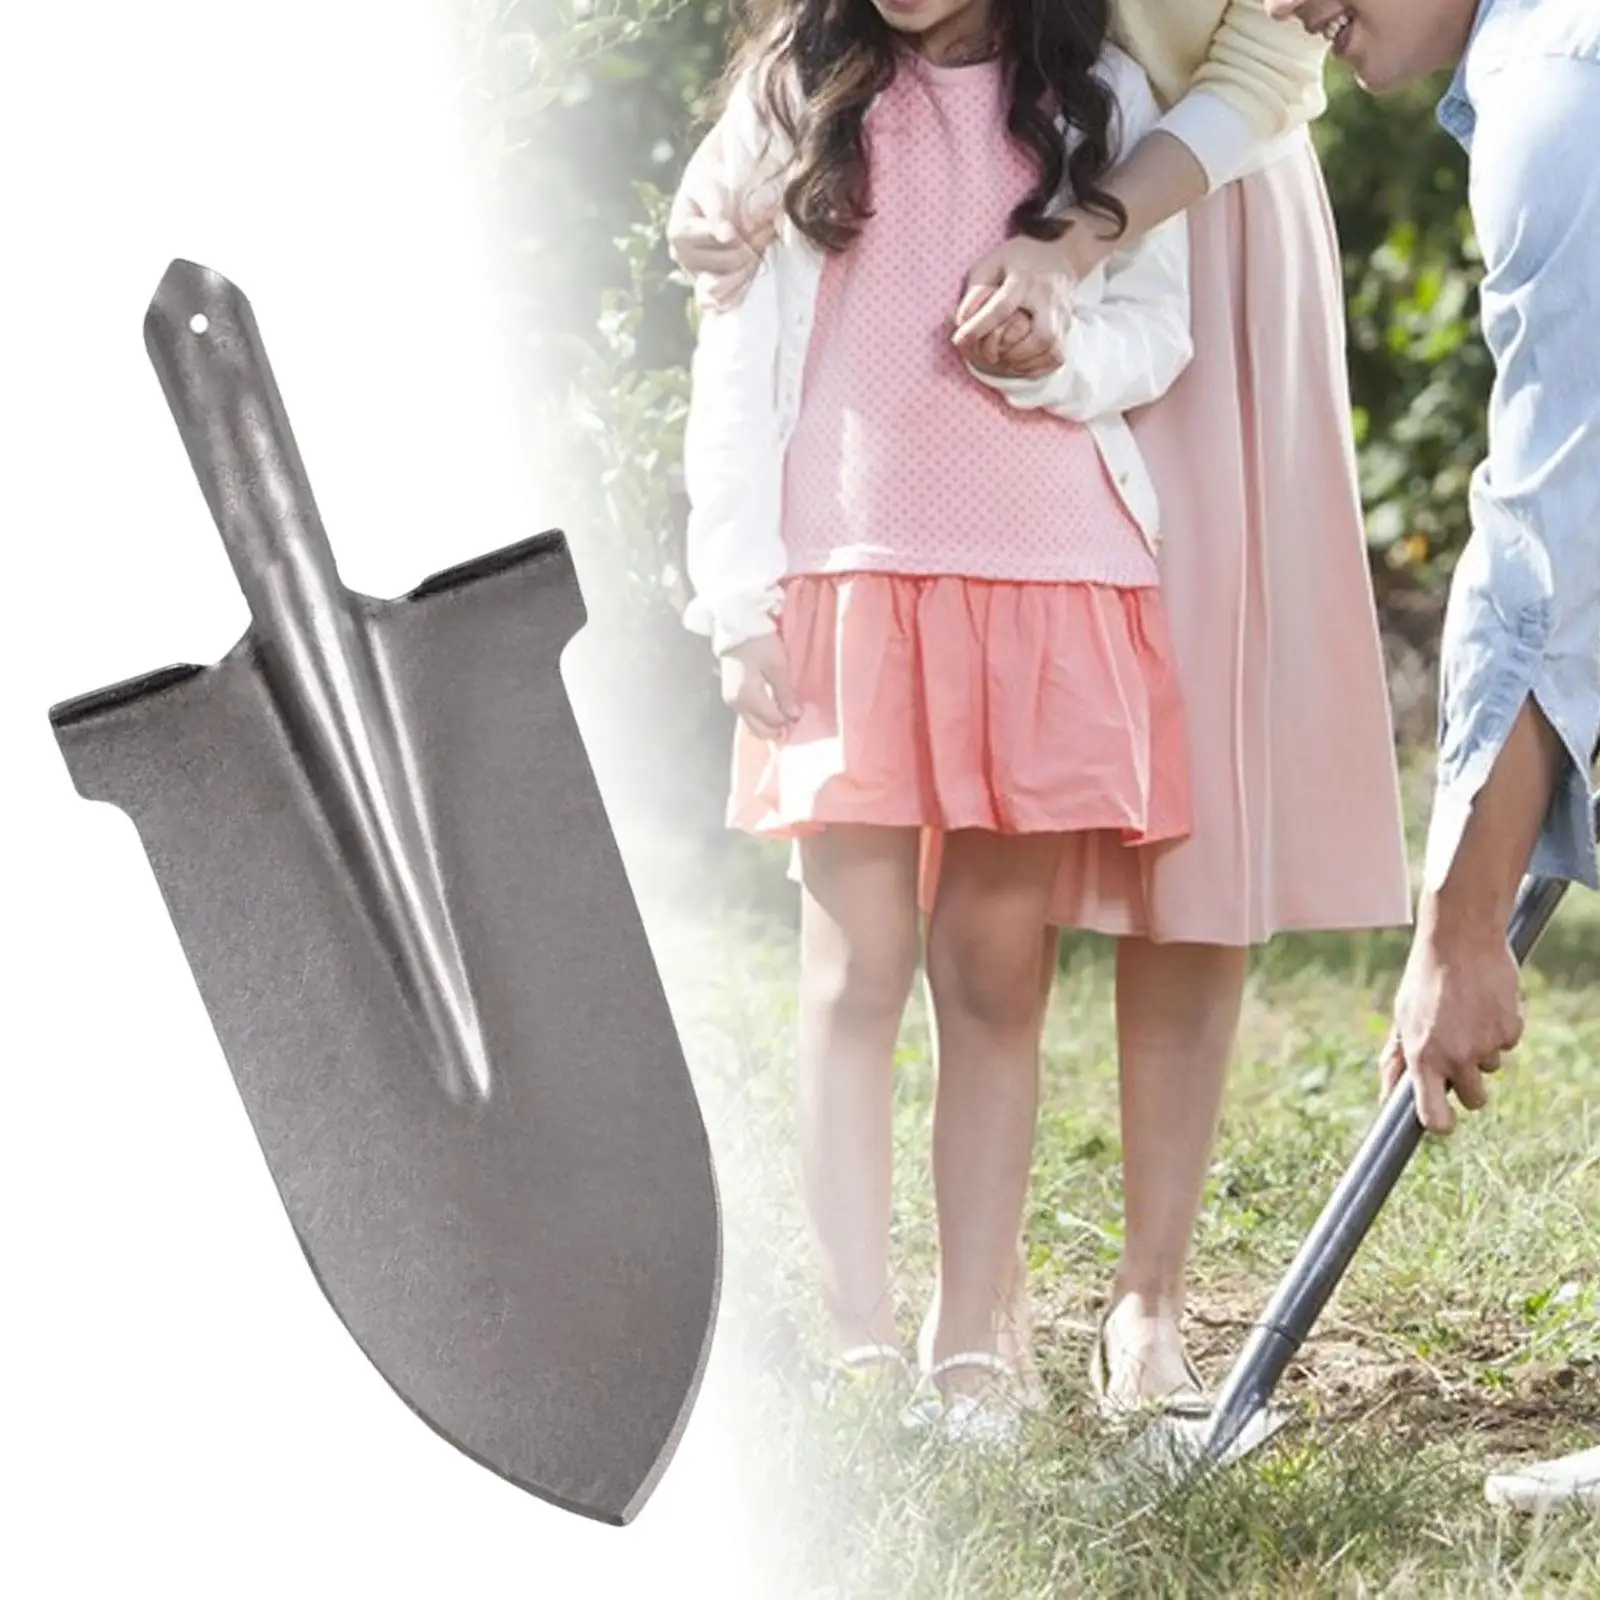 Garden Spade Sturdy Heavy Duty Metal Outdoor Portable Hand Trowel Gardening Tool for Camping Planting Weeding Hiking Backpacking